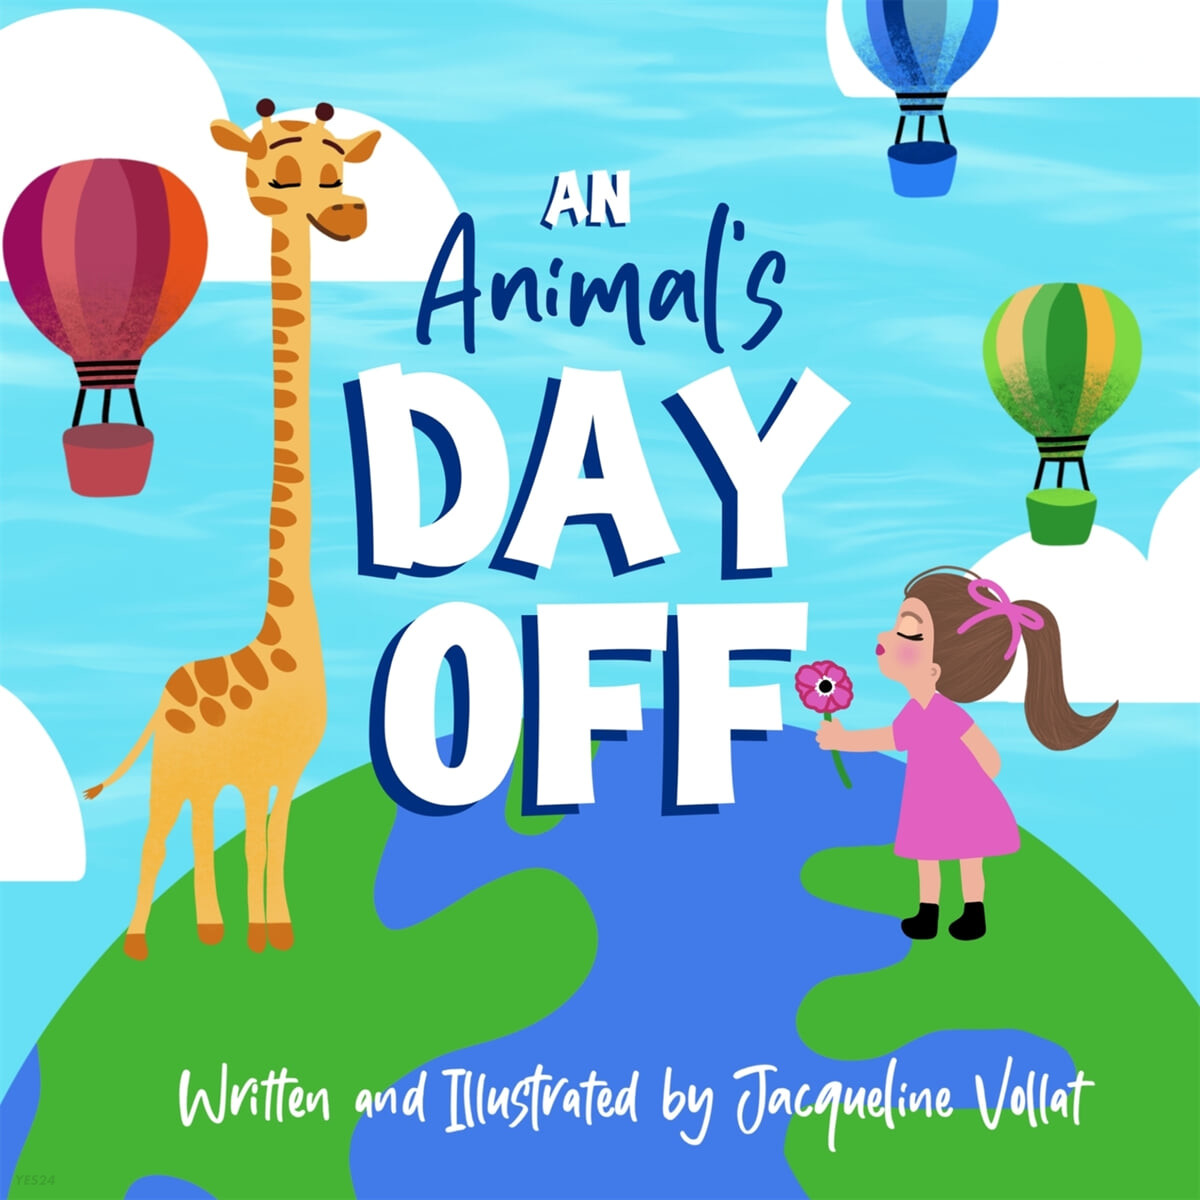 An Animal’s Day Off